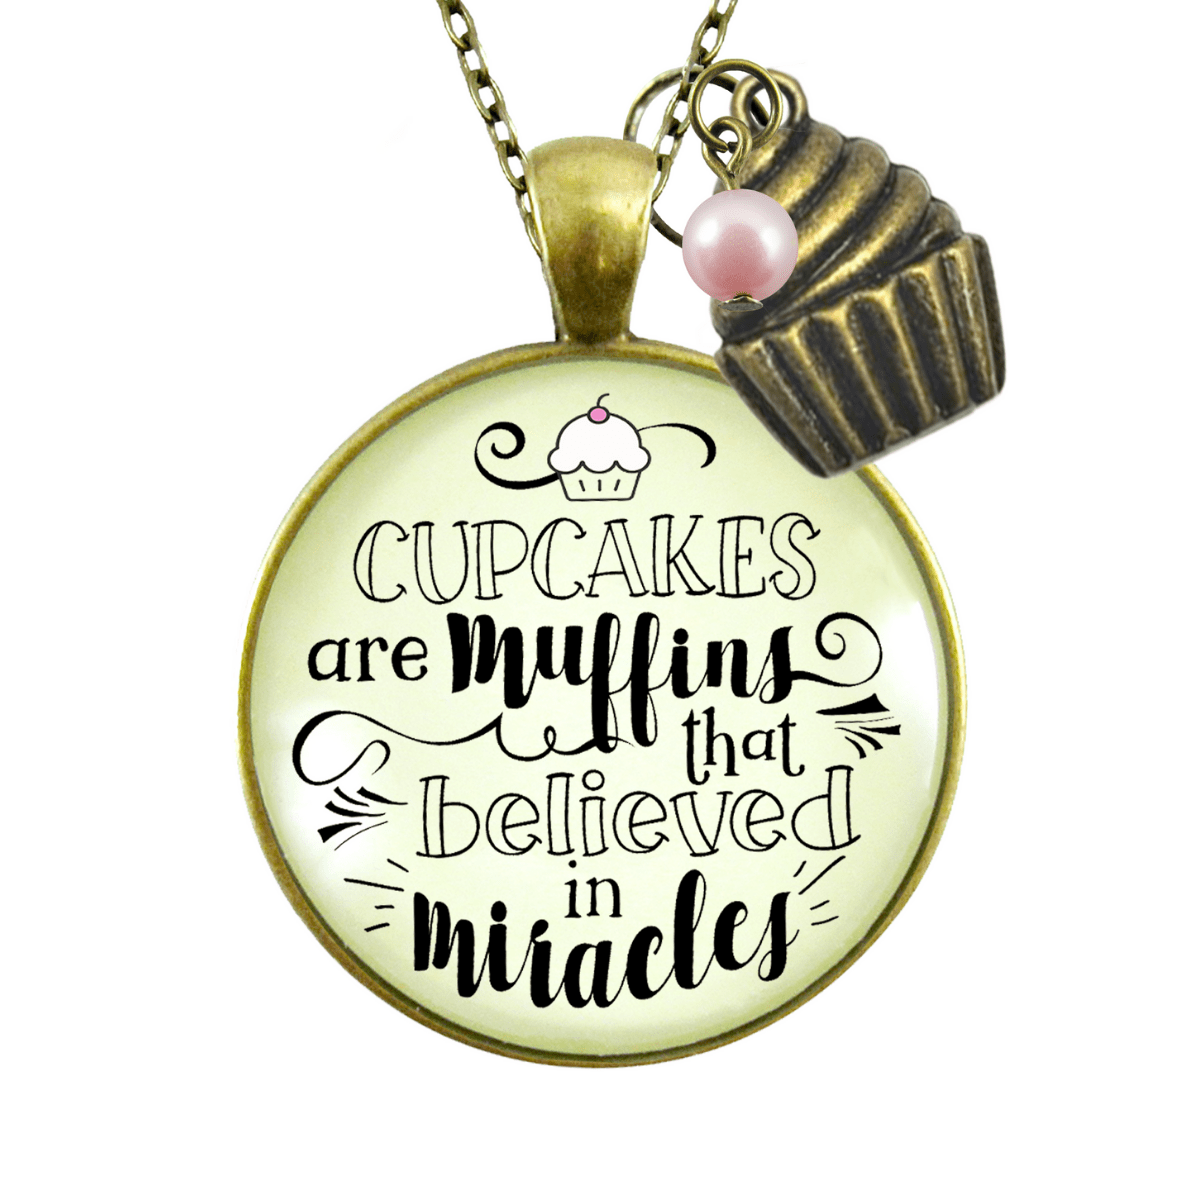 Gutsy Goodness Cupcake Necklace Muffins Believed Miracles Baker Life Cake Jewelry - Gutsy Goodness Handmade Jewelry;Cupcake Necklace Muffins Believed Miracles Baker Life Cake Jewelry - Gutsy Goodness Handmade Jewelry Gifts